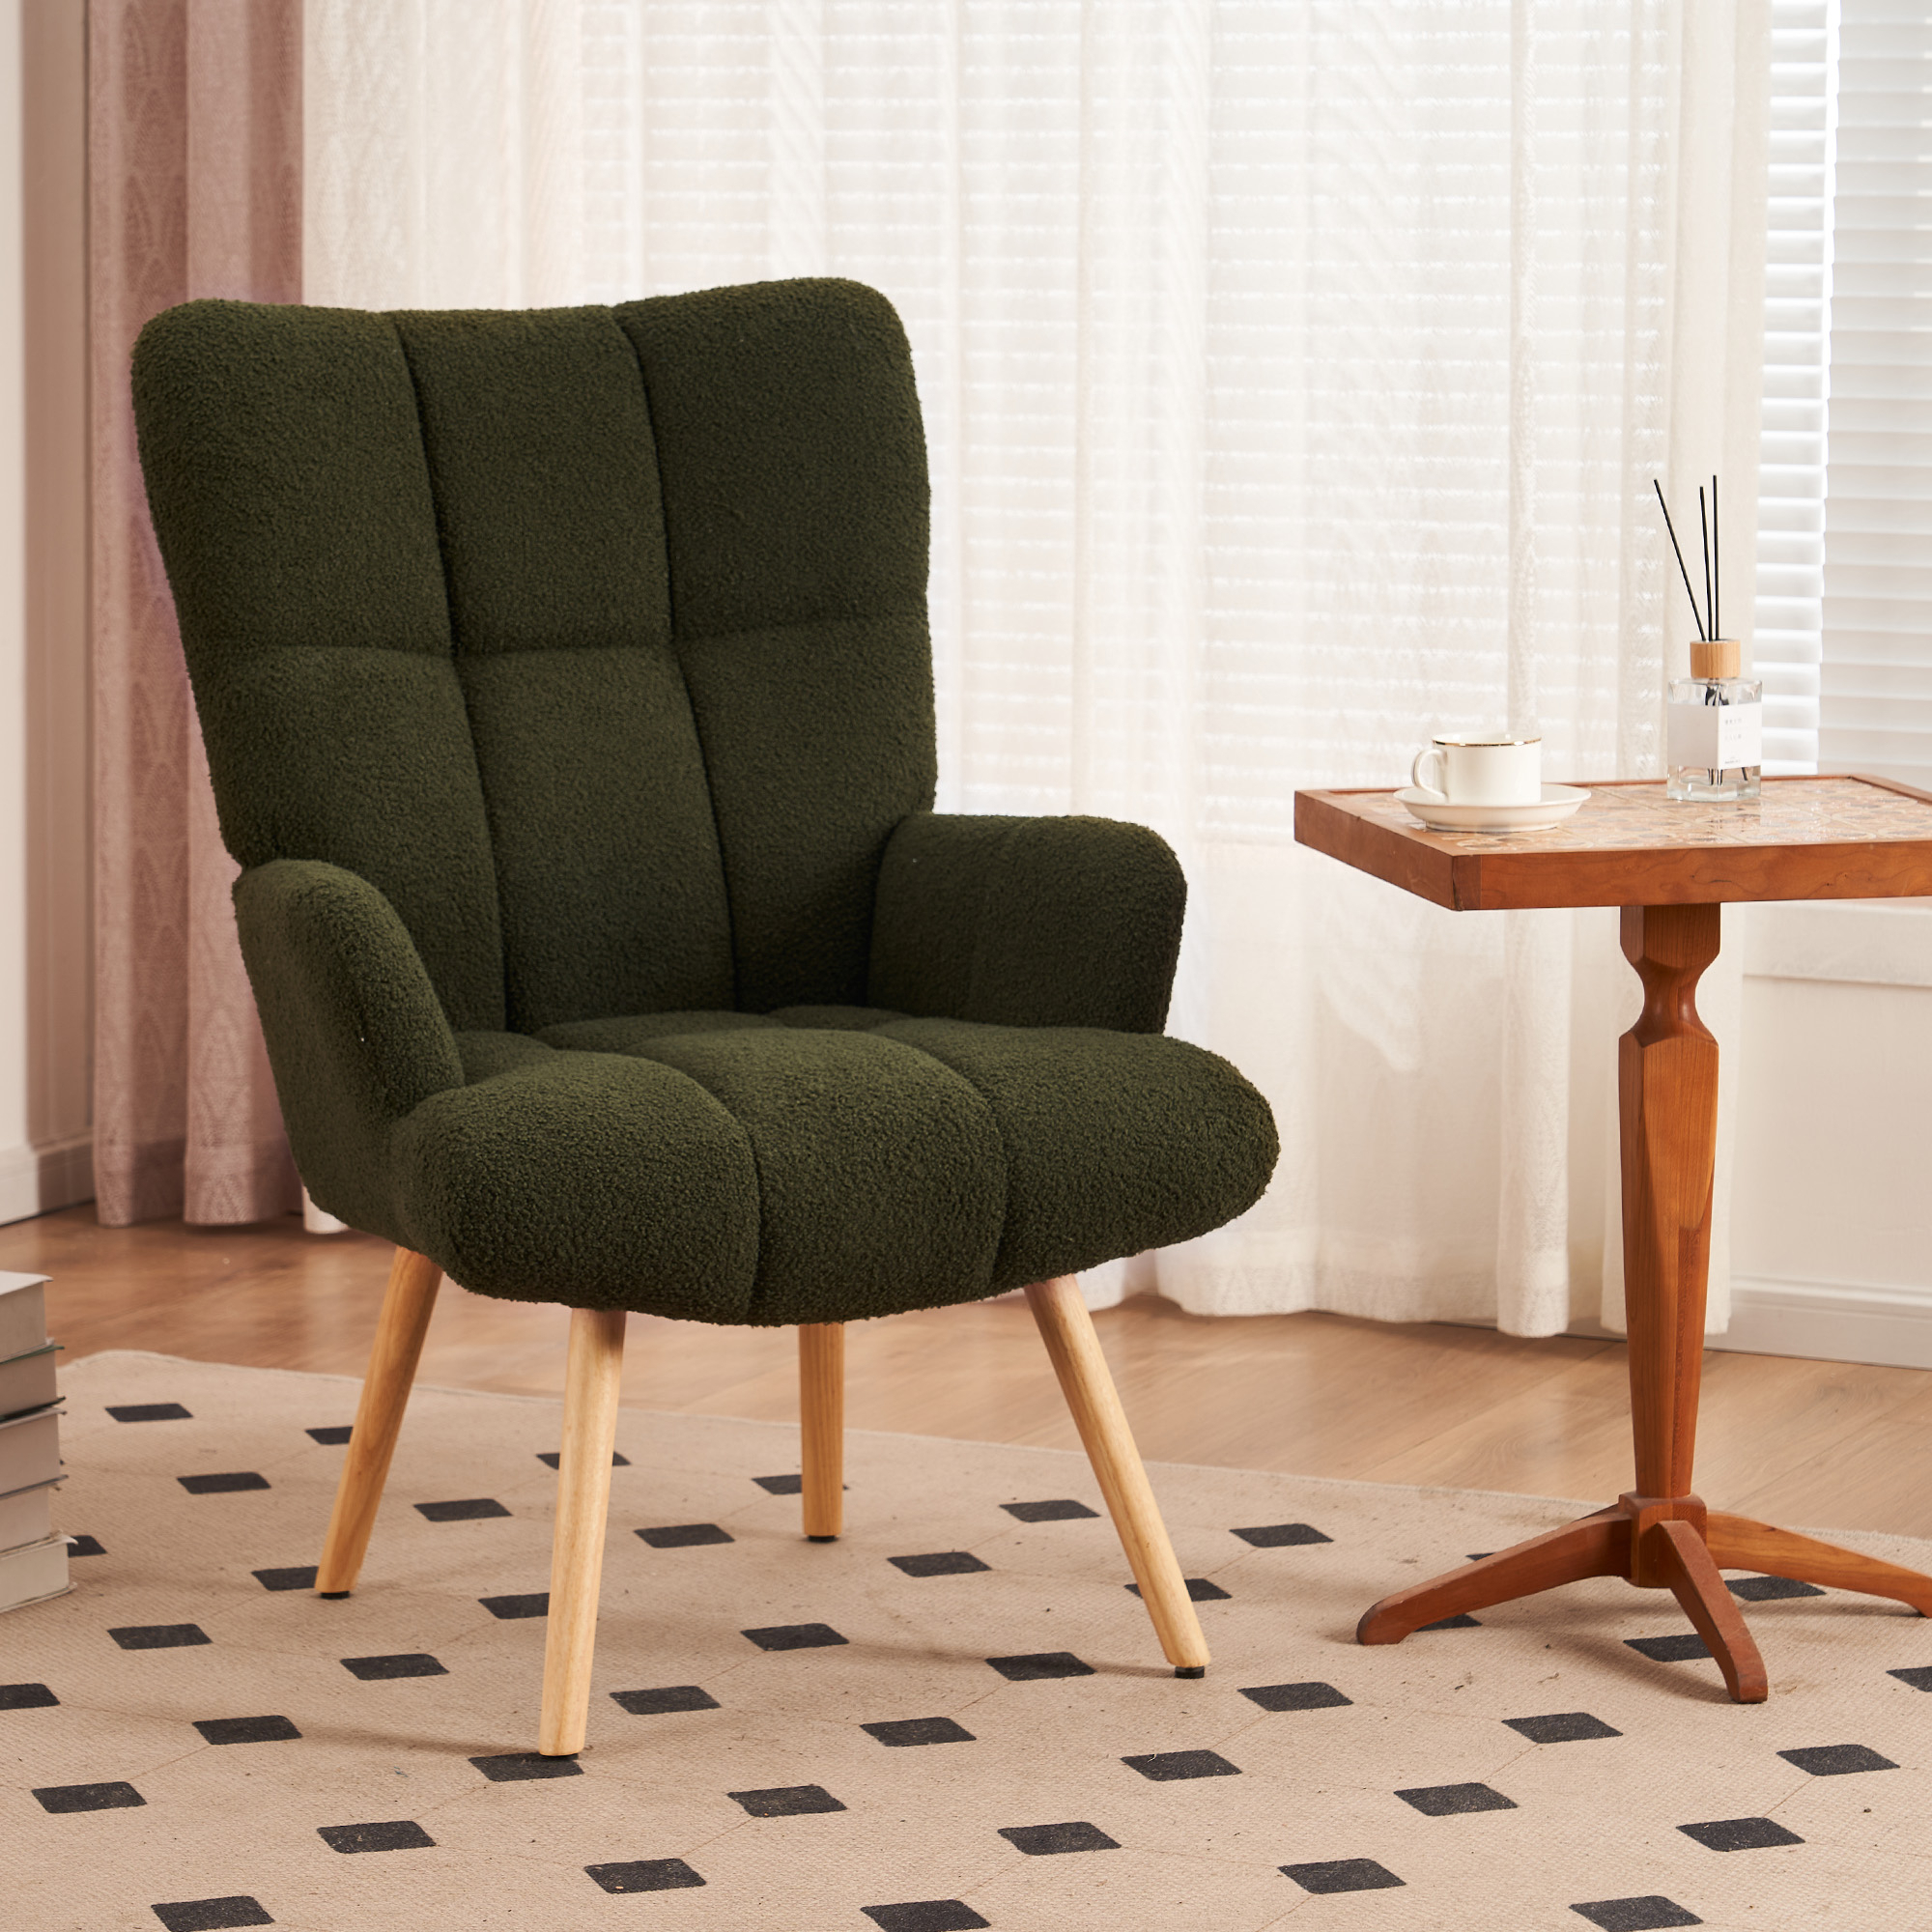 Mordern Accent Chair, Upholstered High Back Comfy Living Room Chair, Wingback Armchair, Basic Teddy Velvet Chair - Green